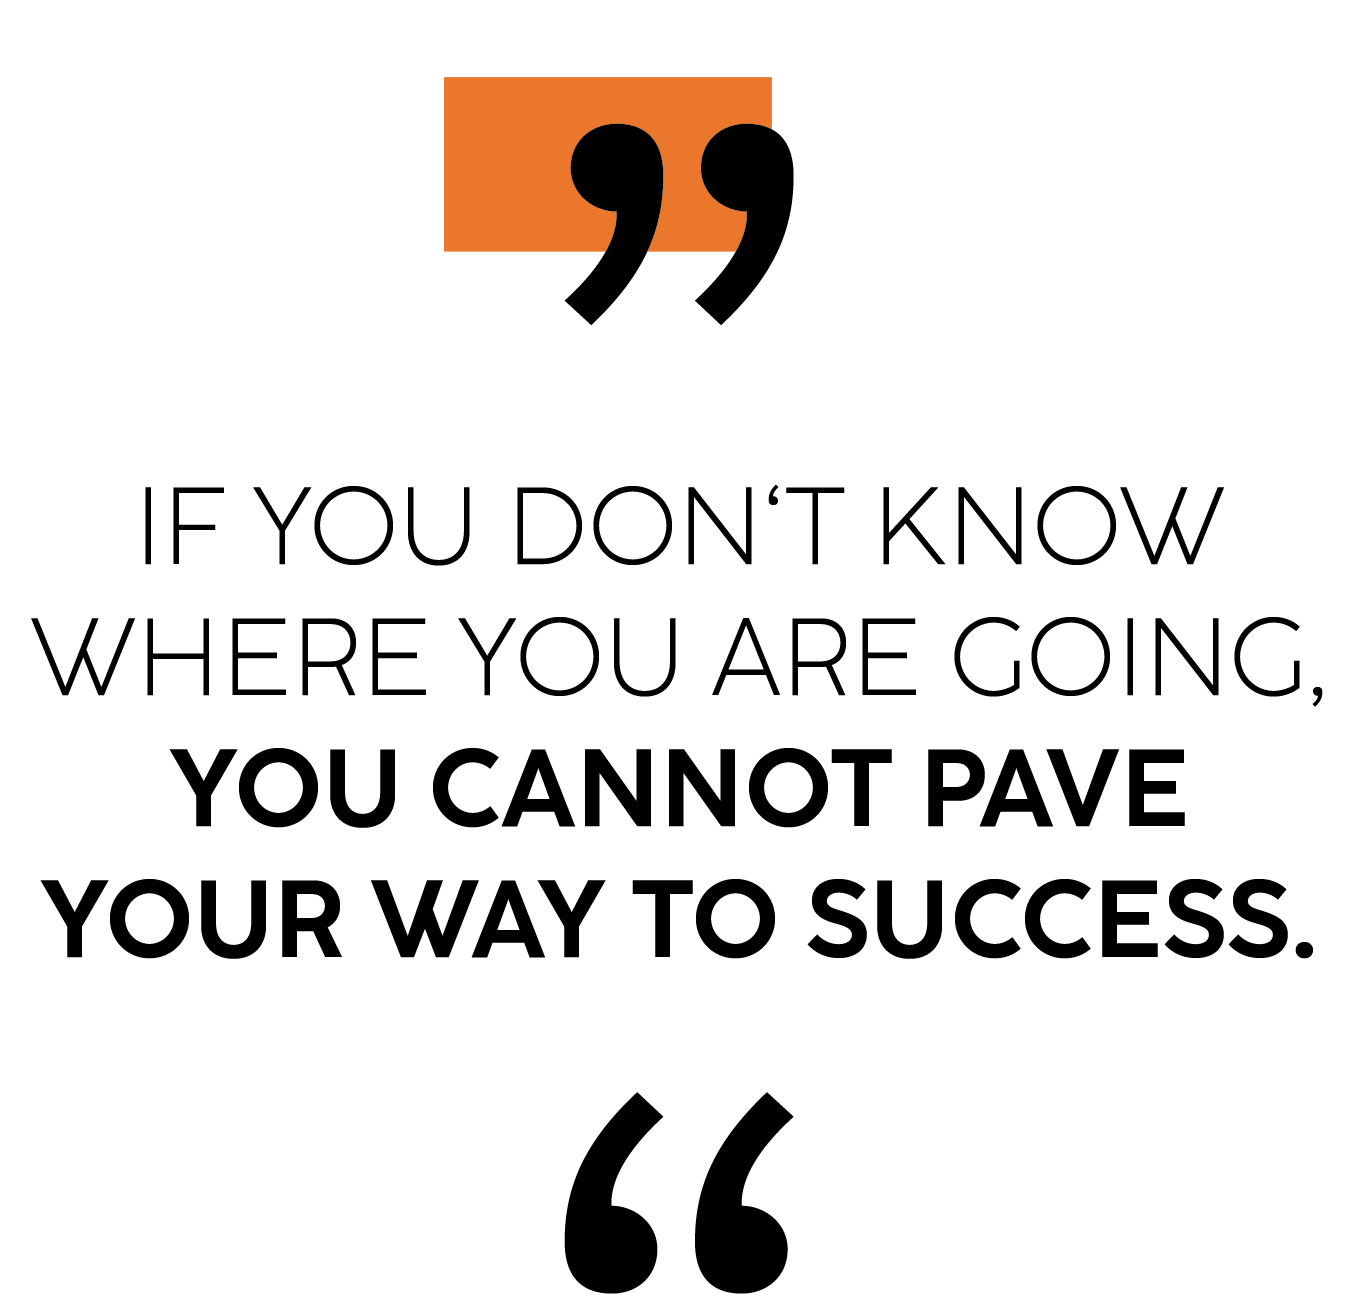 Quote: If you don't know where you are going, you cannot pave your way to success